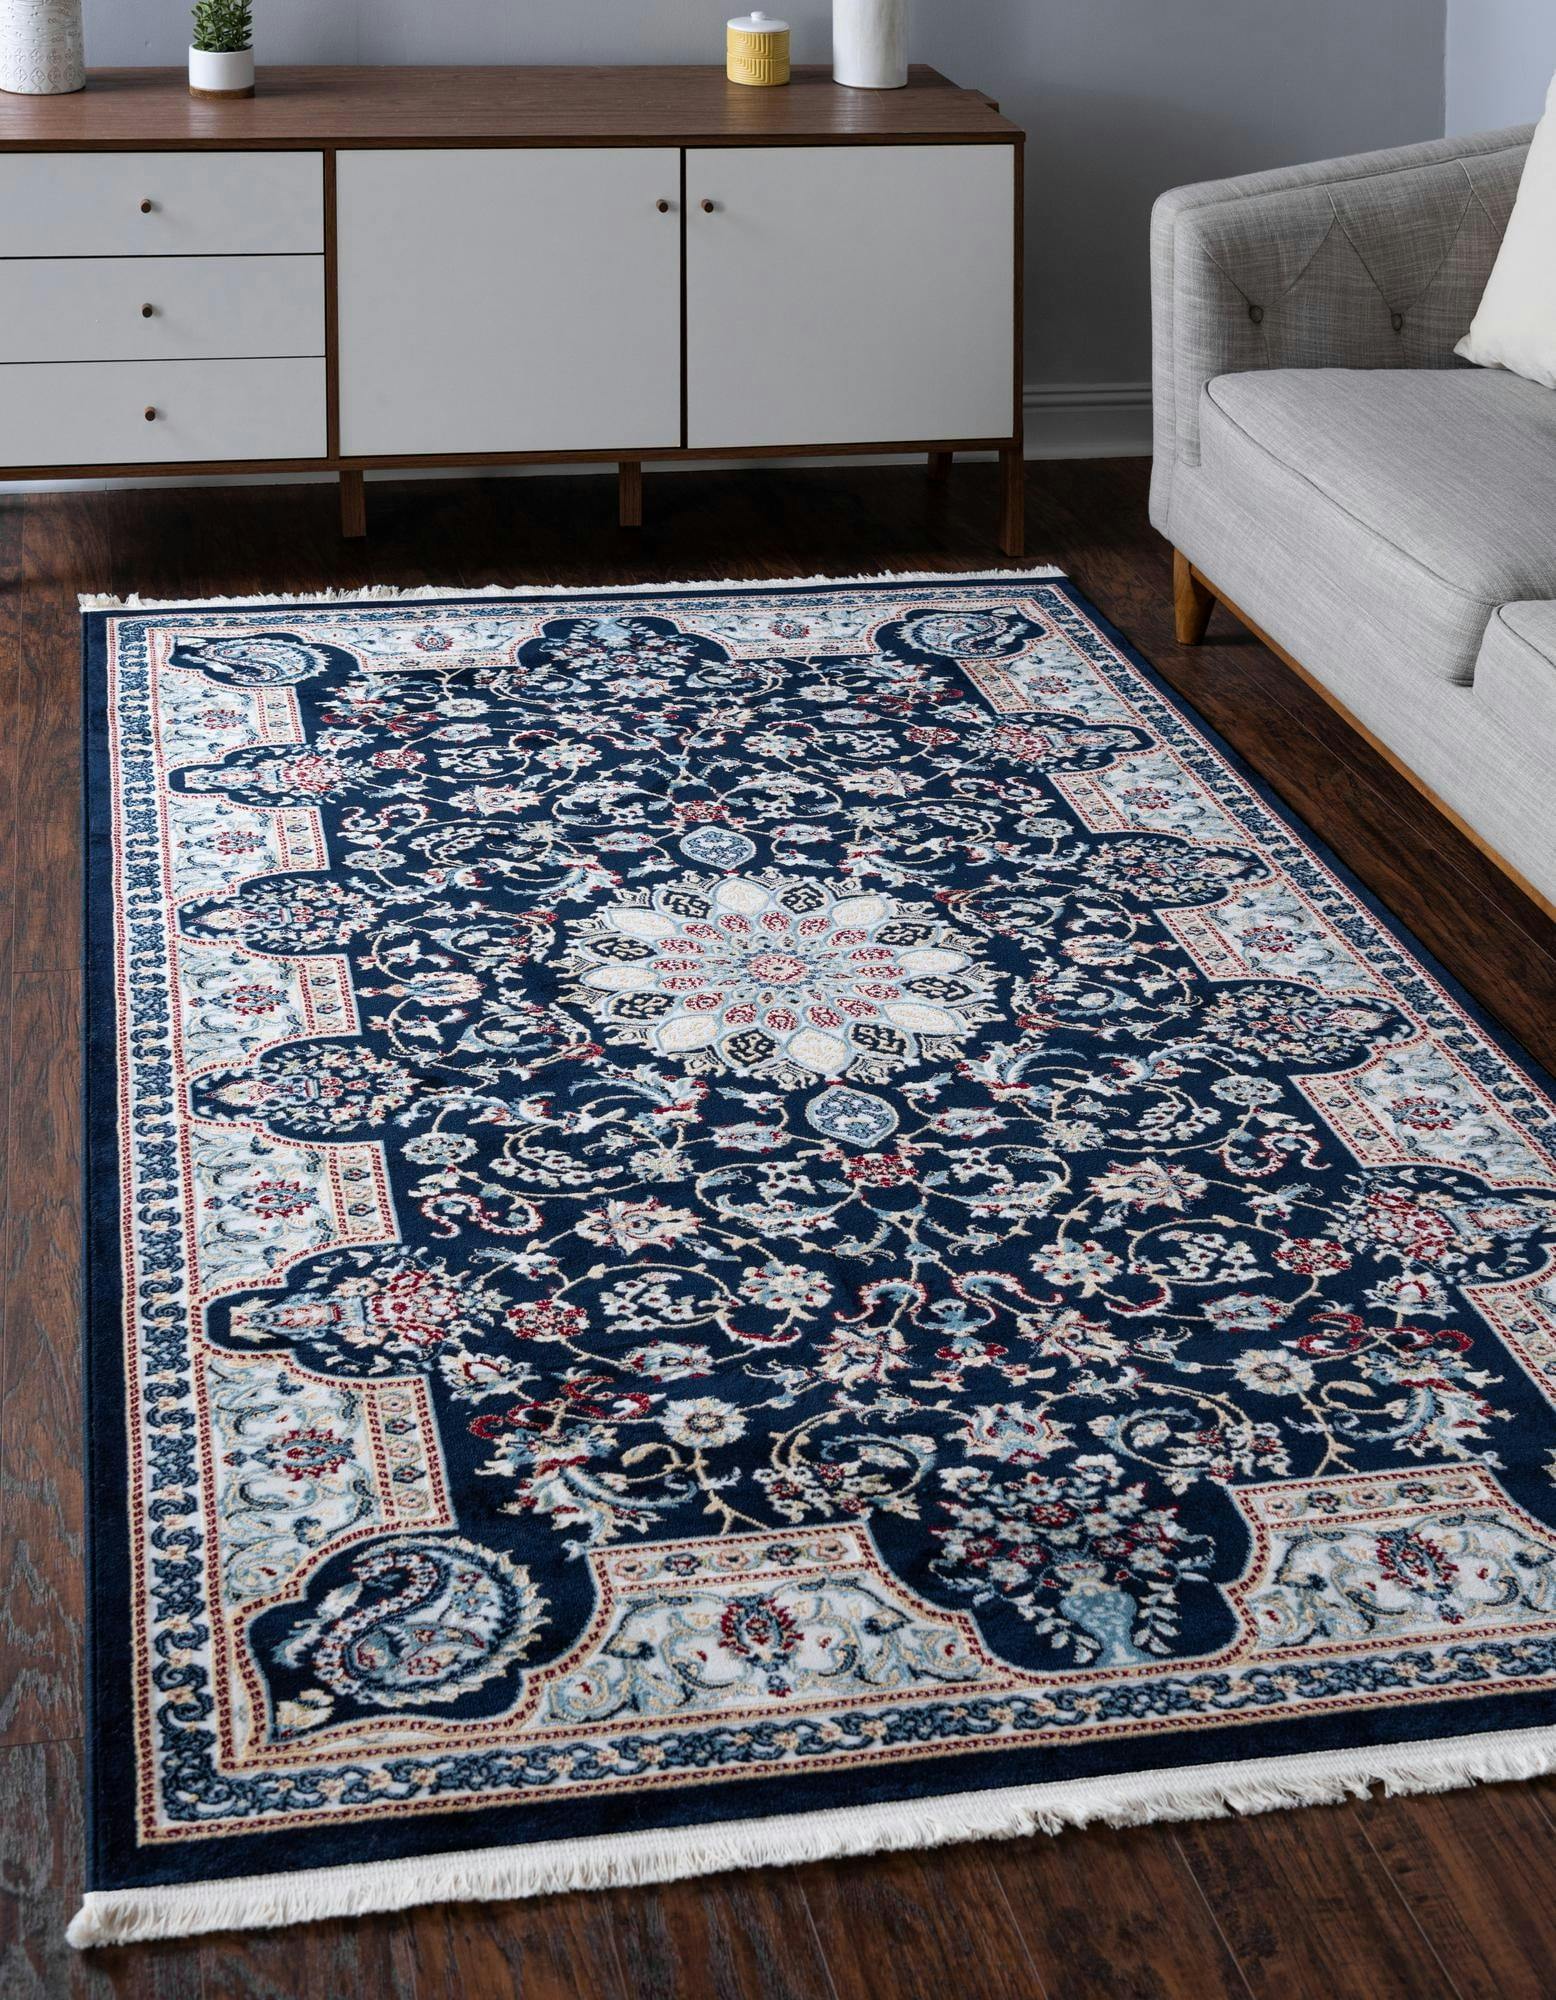 Navy Blue Floral Essence 3' x 5' Synthetic Rectangular Rug